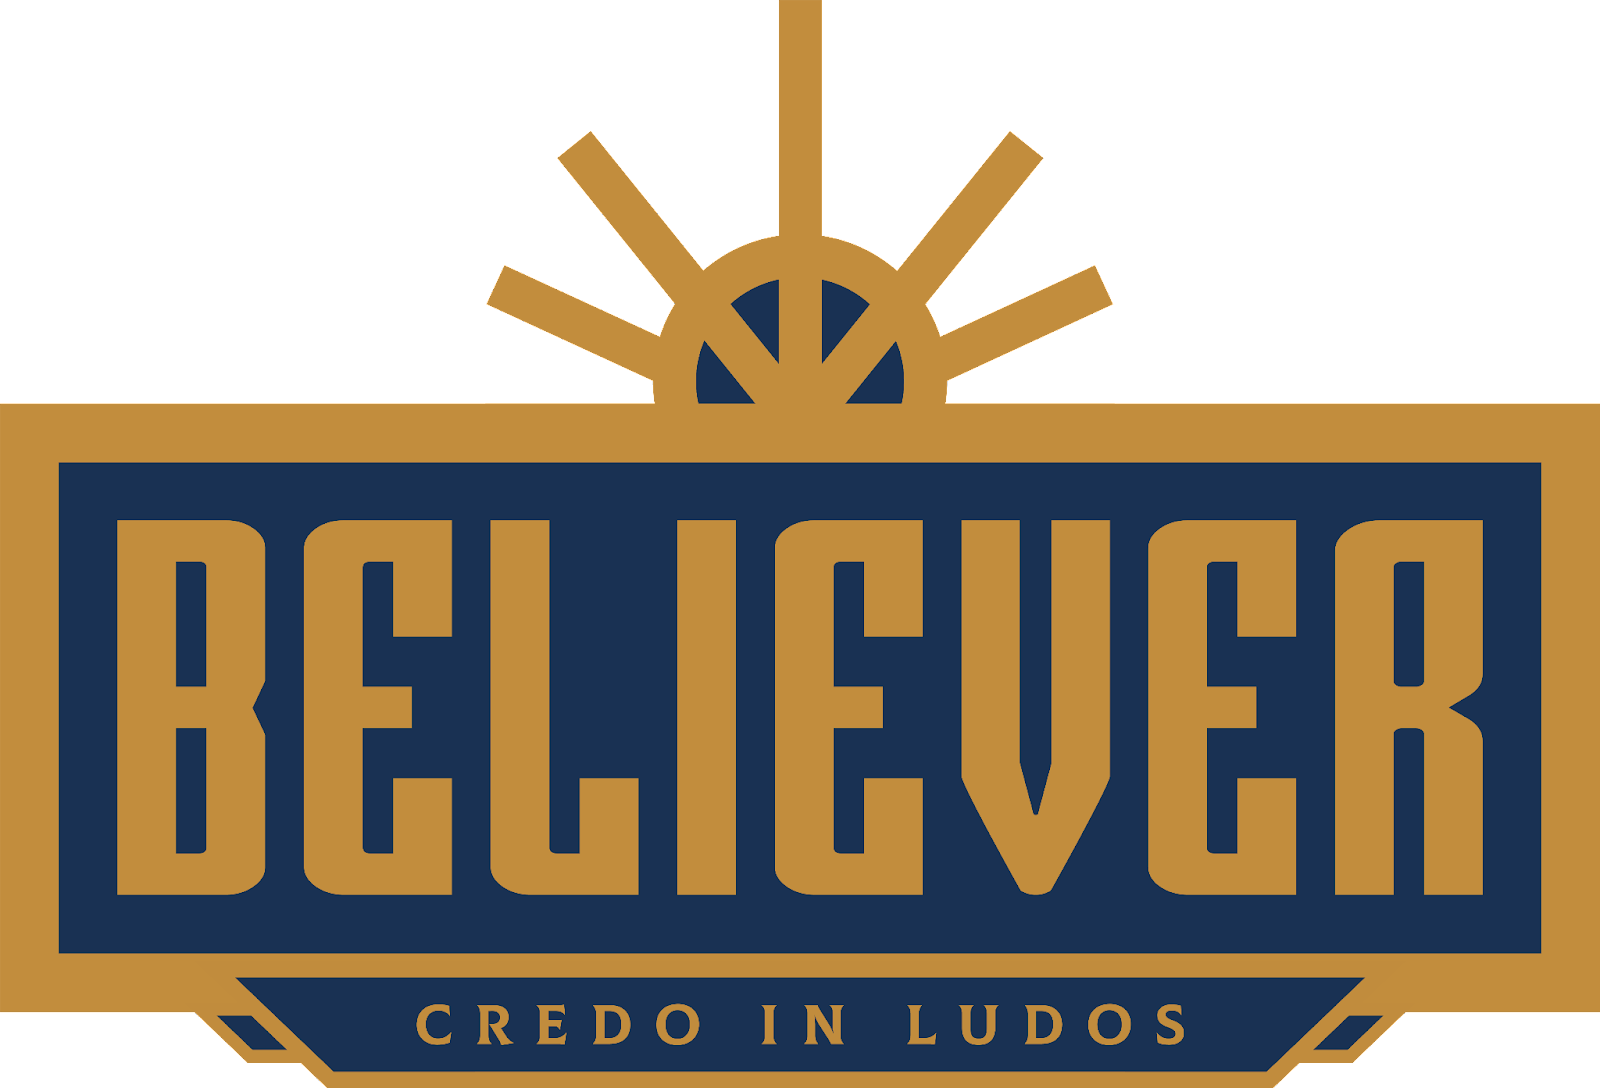 THE BELIEVER COMPANY